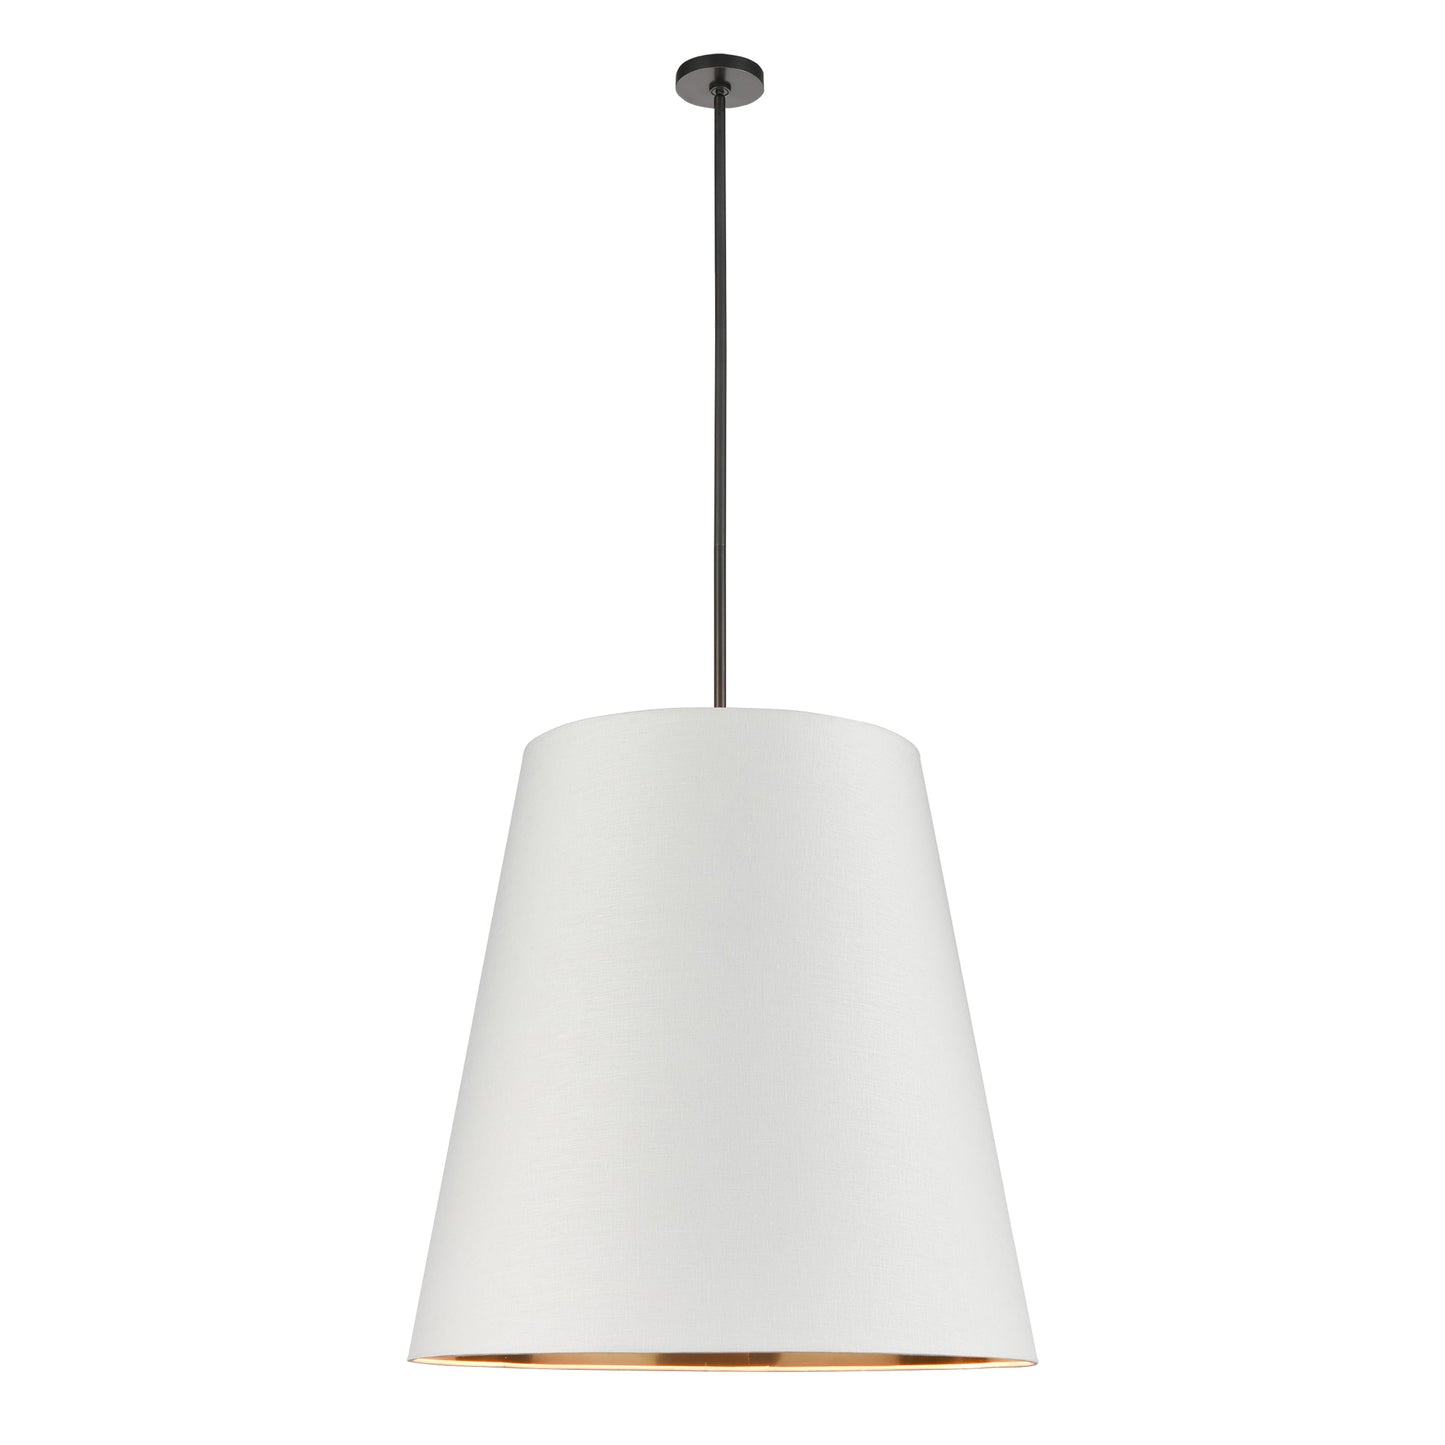 PD311030UBWG Calor 3 Light 30" Urban Bronze With White Linen And Gold Parchment Shade Pendant